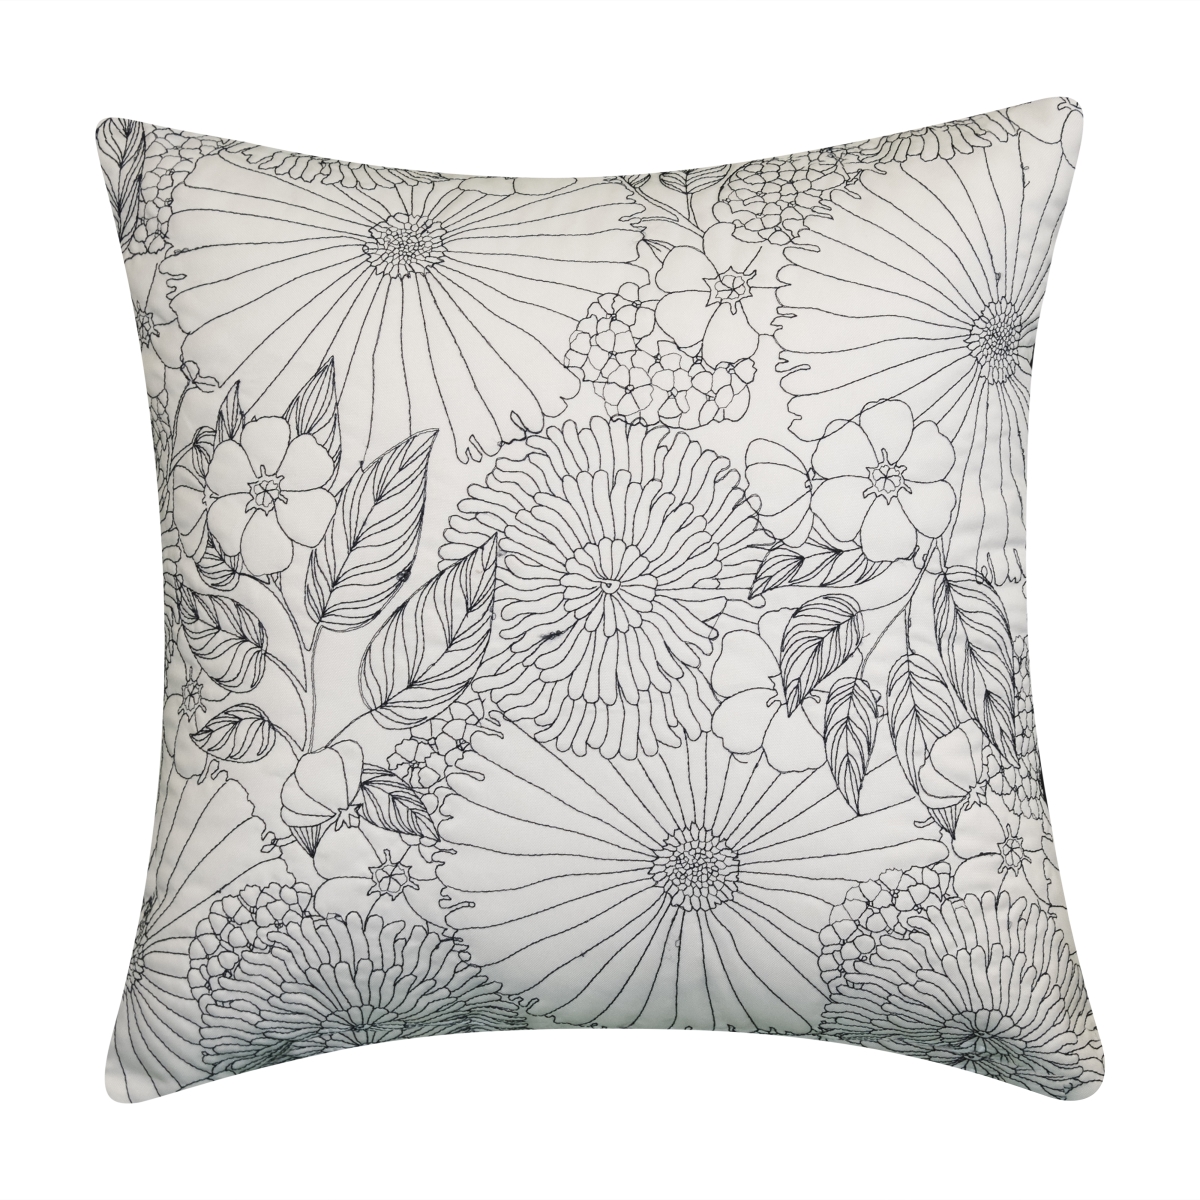 Eah089bw420527 18 X 18 In. Fine Line Embroidered Floral Indoor & Outdoor Decorative Pillow, Black